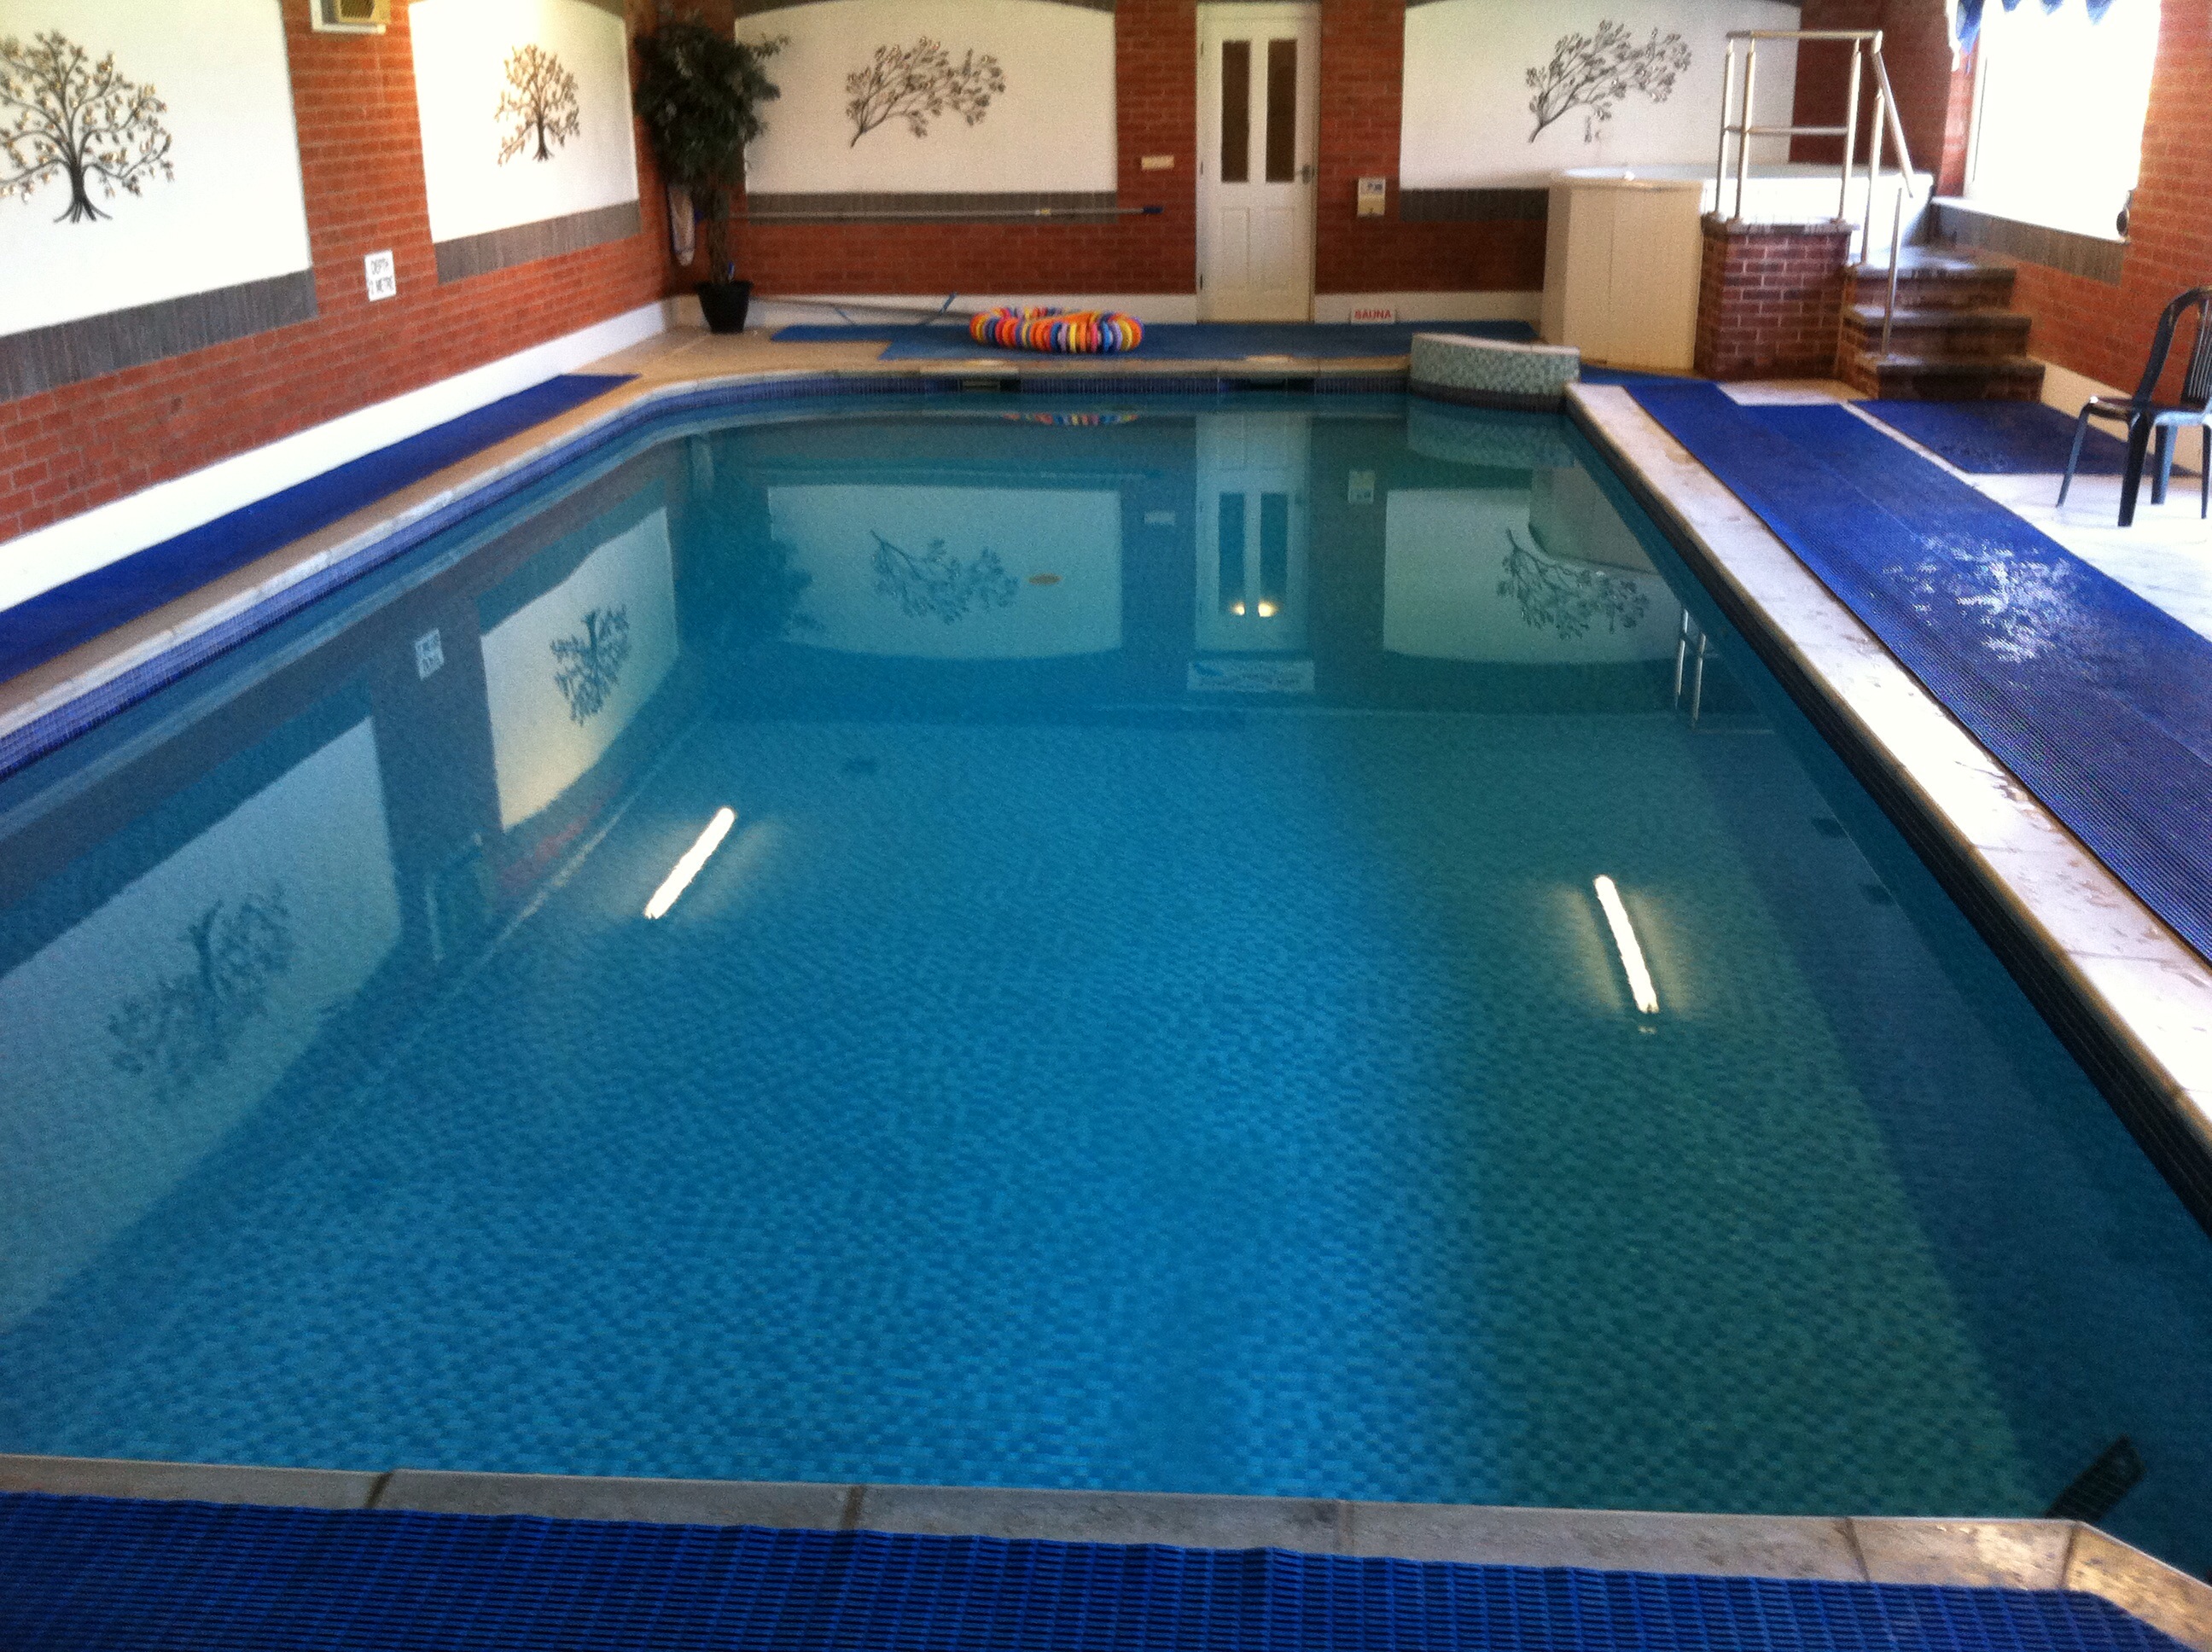 Cumbria Office for the Day | Swimming Pools & Hot Tubs in Blackpool ...